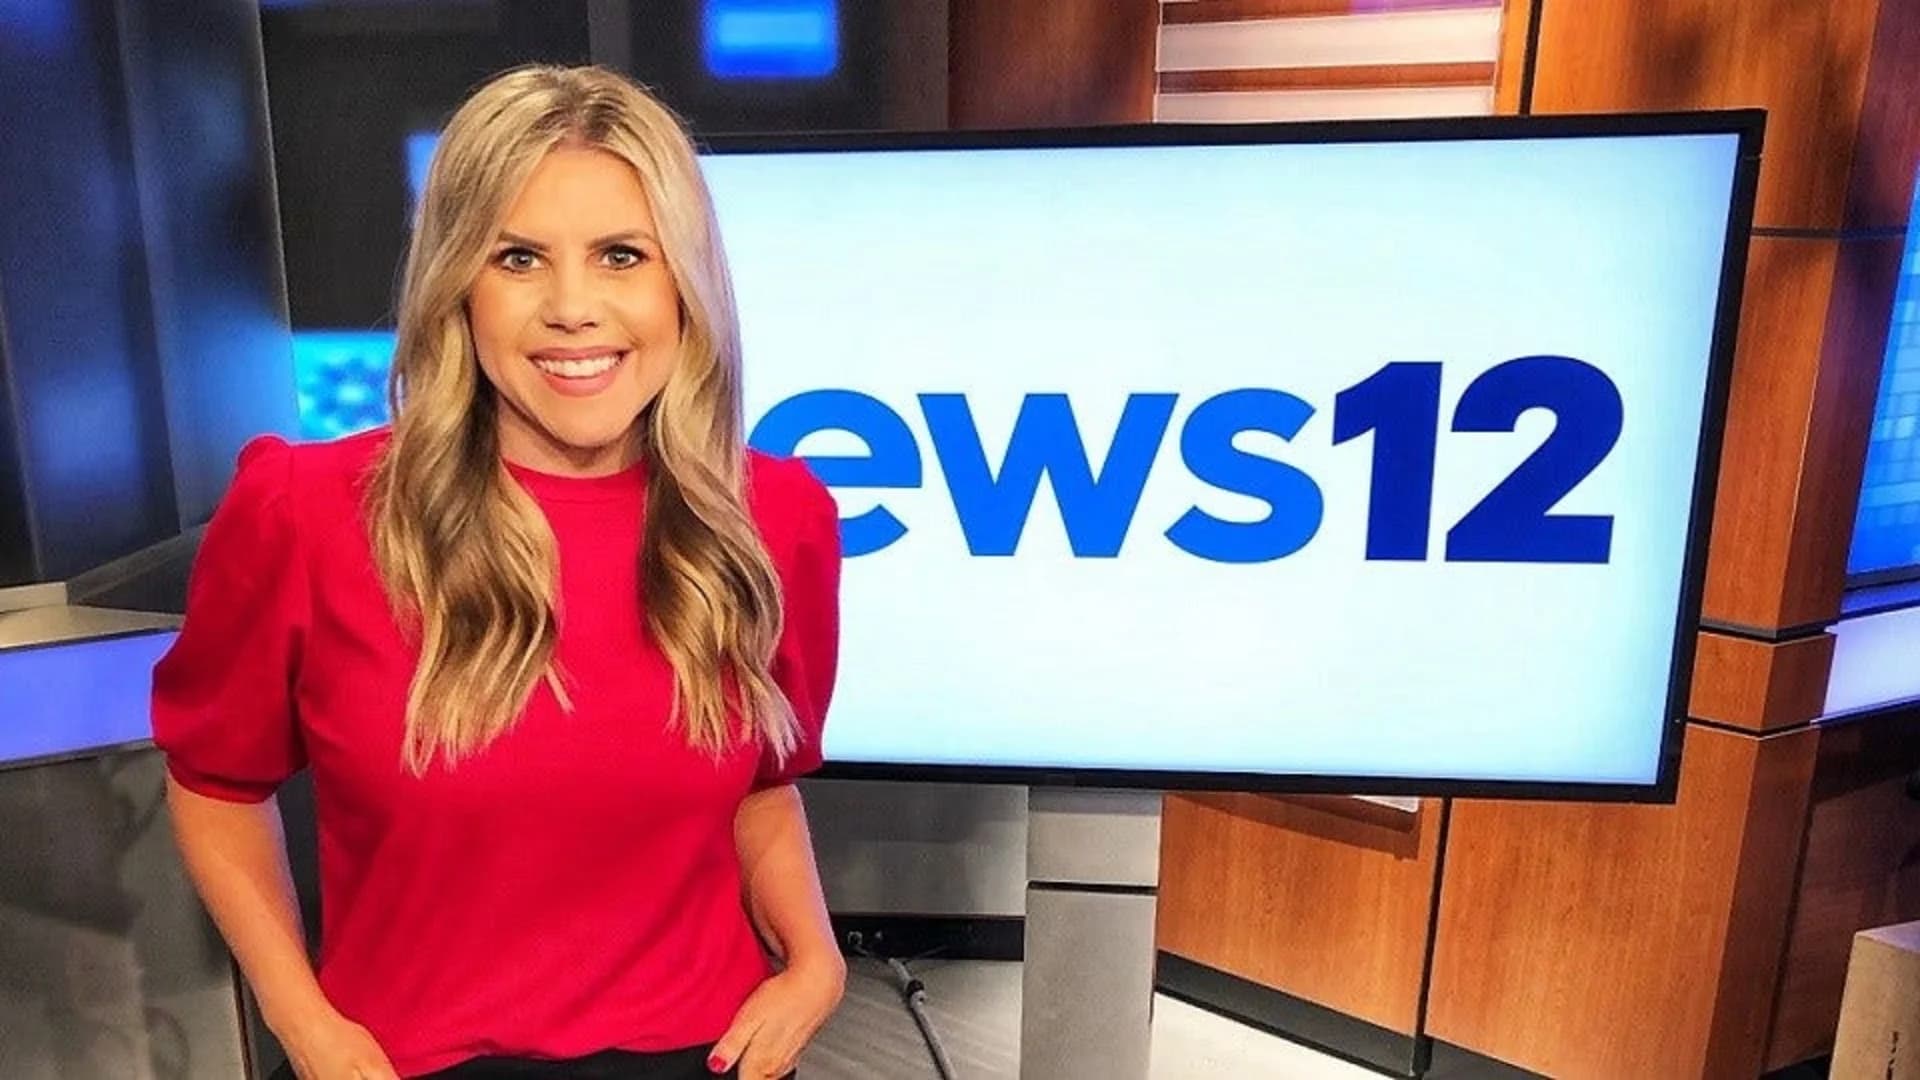 News 12 goes red for heart health awareness